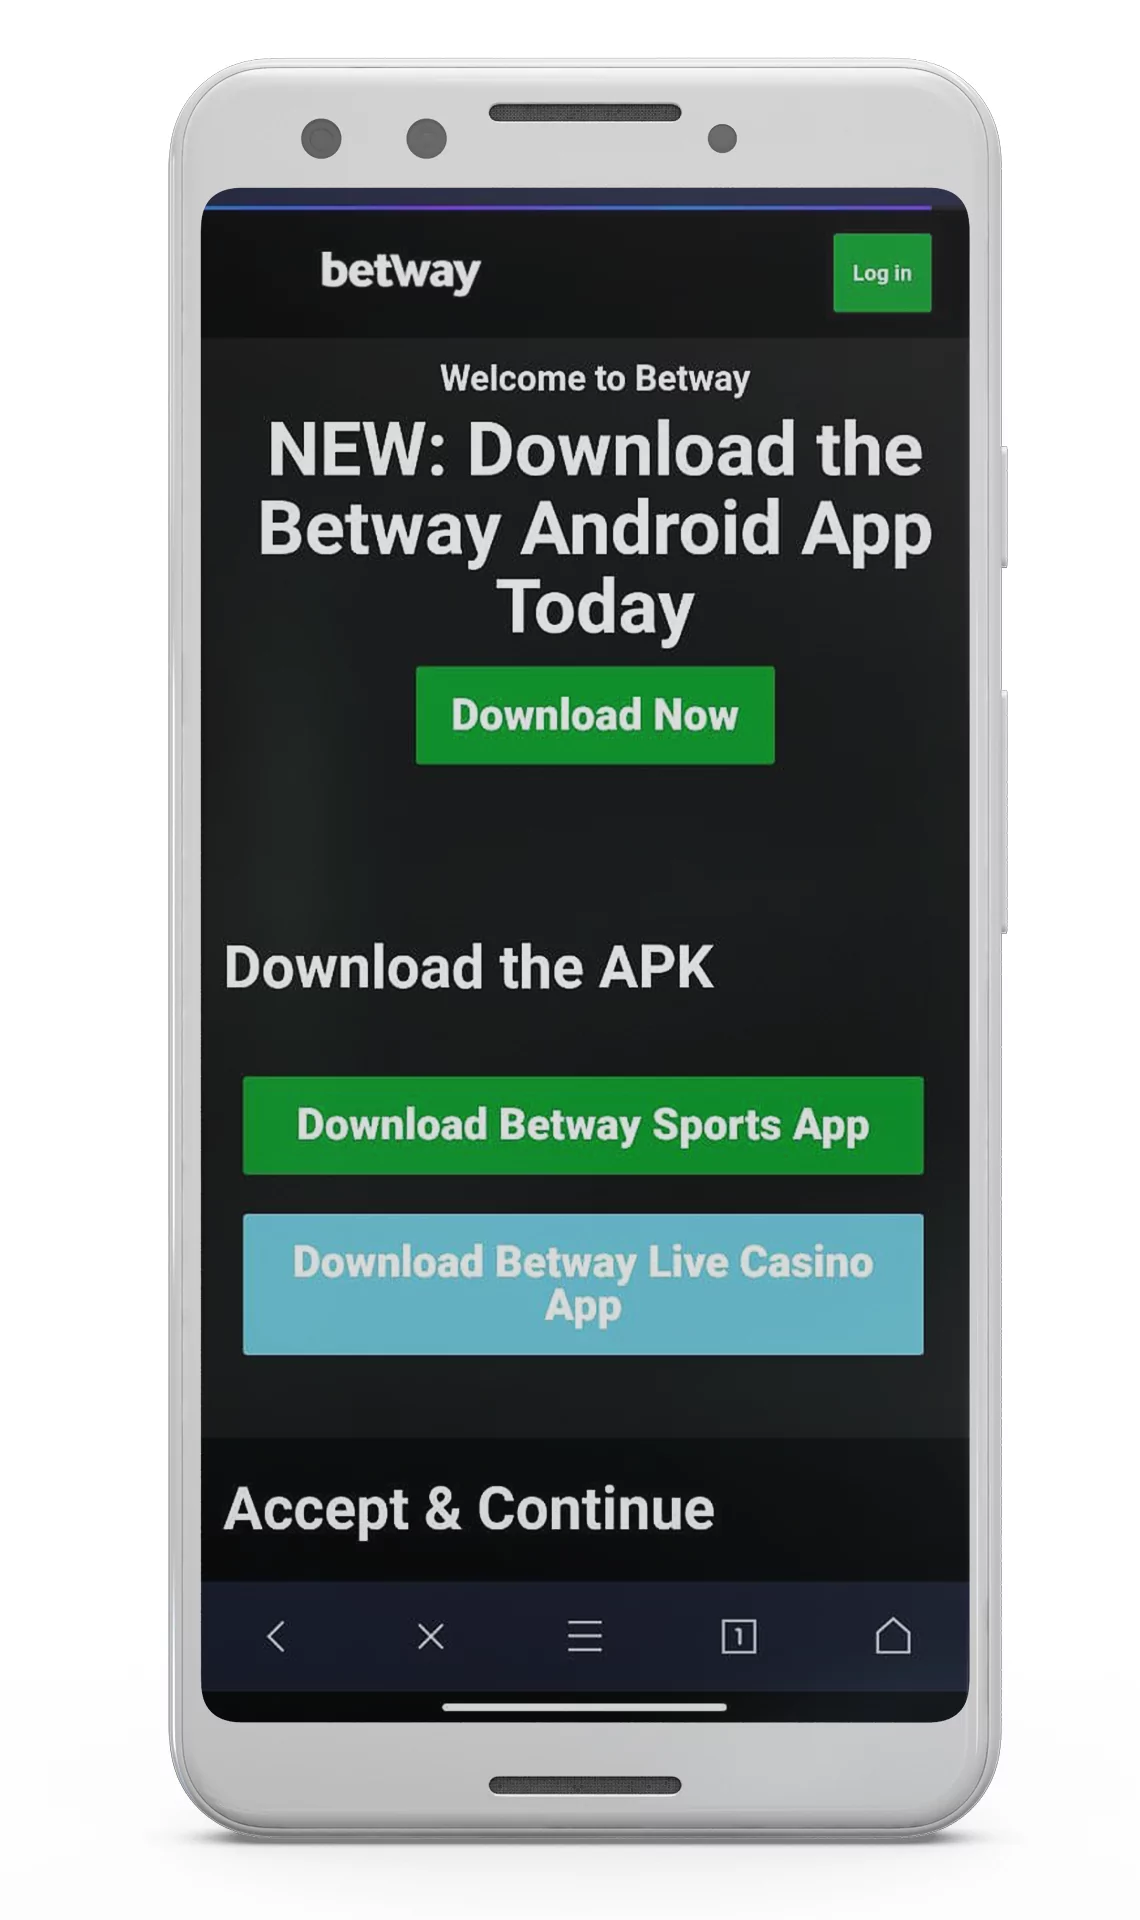 Press "Download now" to initiate downloading Betway APK file.